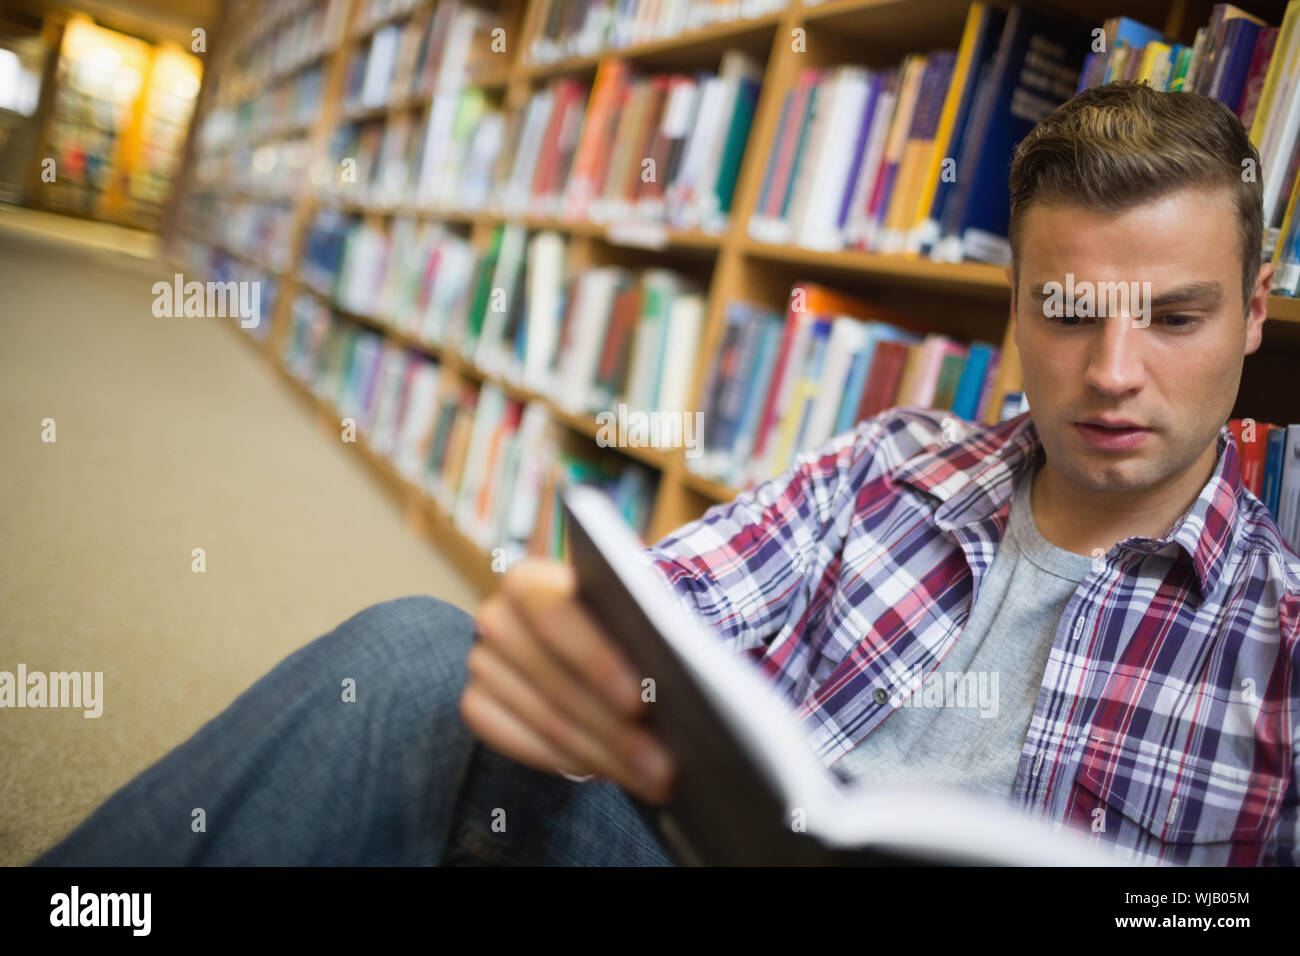 Serious young student sitting on library floor reading book Stock Photo